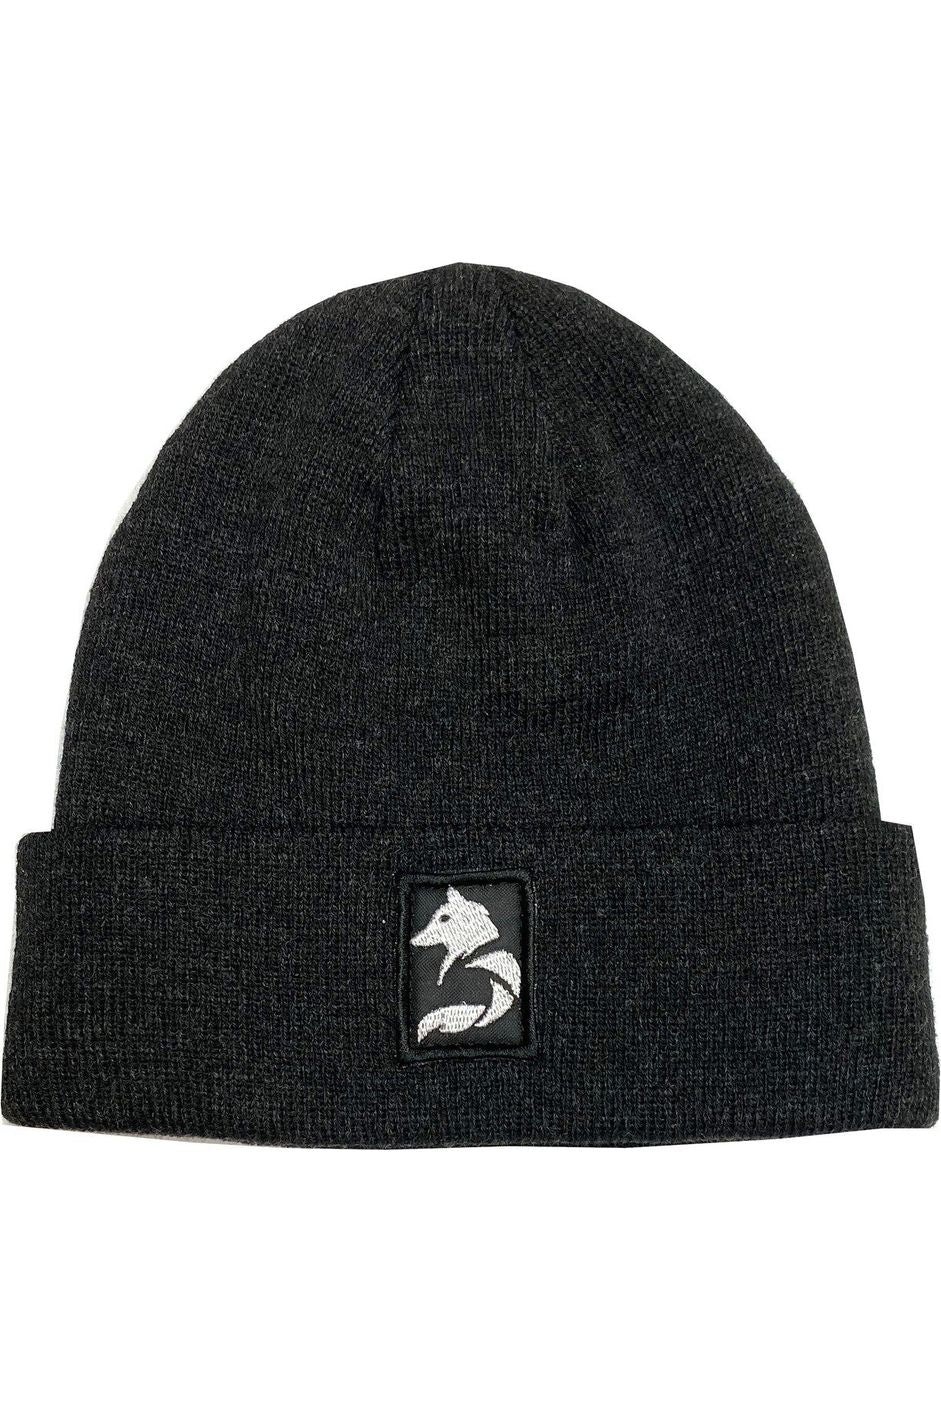 Desloups brimmed beanie with wolf logo